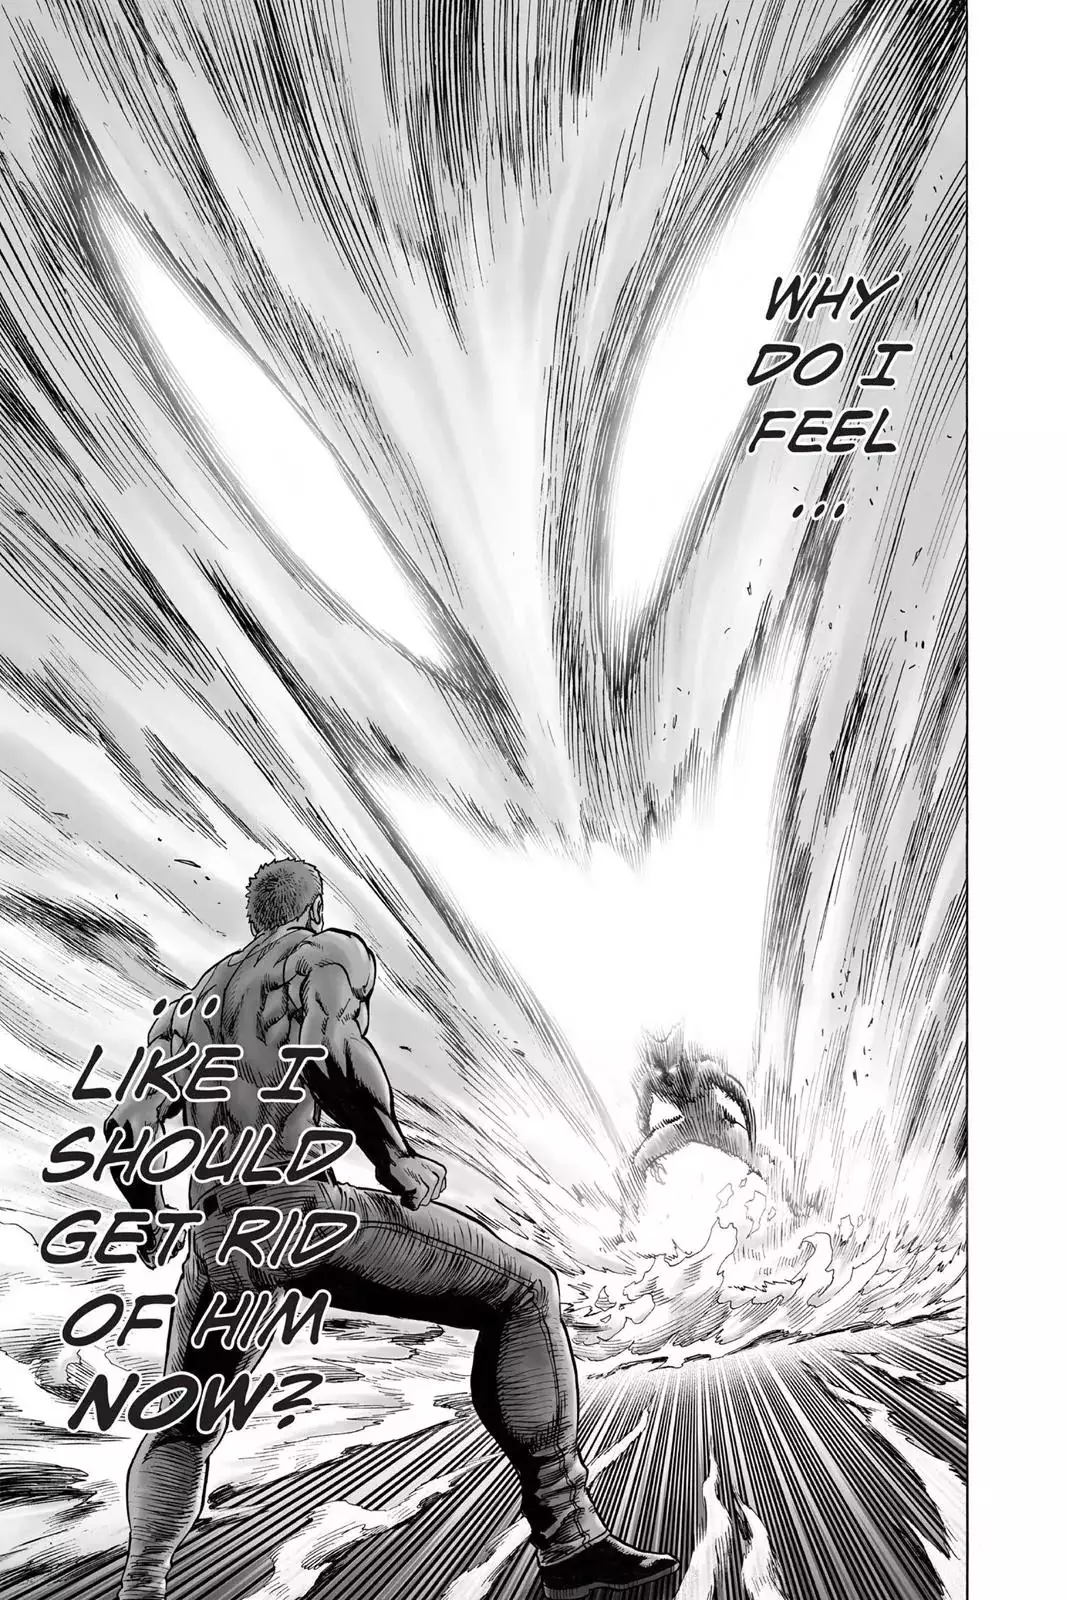 One Punch Man Chapter 47, READ One Punch Man Chapter 47 ONLINE, lost in the cloud genre,lost in the cloud gif,lost in the cloud girl,lost in the cloud goods,lost in the cloud goodreads,lost in the cloud,lost ark cloud gaming,lost odyssey cloud gaming,lost in the cloud fanart,lost in the cloud fanfic,lost in the cloud fandom,lost in the cloud first kiss,lost in the cloud font,lost in the cloud ending,lost in the cloud episode 97,lost in the cloud edit,lost in the cloud explained,lost in the cloud dog,lost in the cloud discord server,lost in the cloud desktop wallpaper,lost in the cloud drawing,can't find my cloud on network,lost in the cloud characters,lost in the cloud chapter 93 release date,lost in the cloud birthday,lost in the cloud birthday art,lost in the cloud background,lost in the cloud banner,lost in the clouds meaning,what is the black cloud in lost,lost in the cloud ao3,lost in the cloud anime,lost in the cloud art,lost in the cloud author twitter,lost in the cloud author instagram,lost in the cloud artist,lost in the cloud acrylic stand,lost in the cloud artist twitter,lost in the cloud art style,lost in the cloud analysis